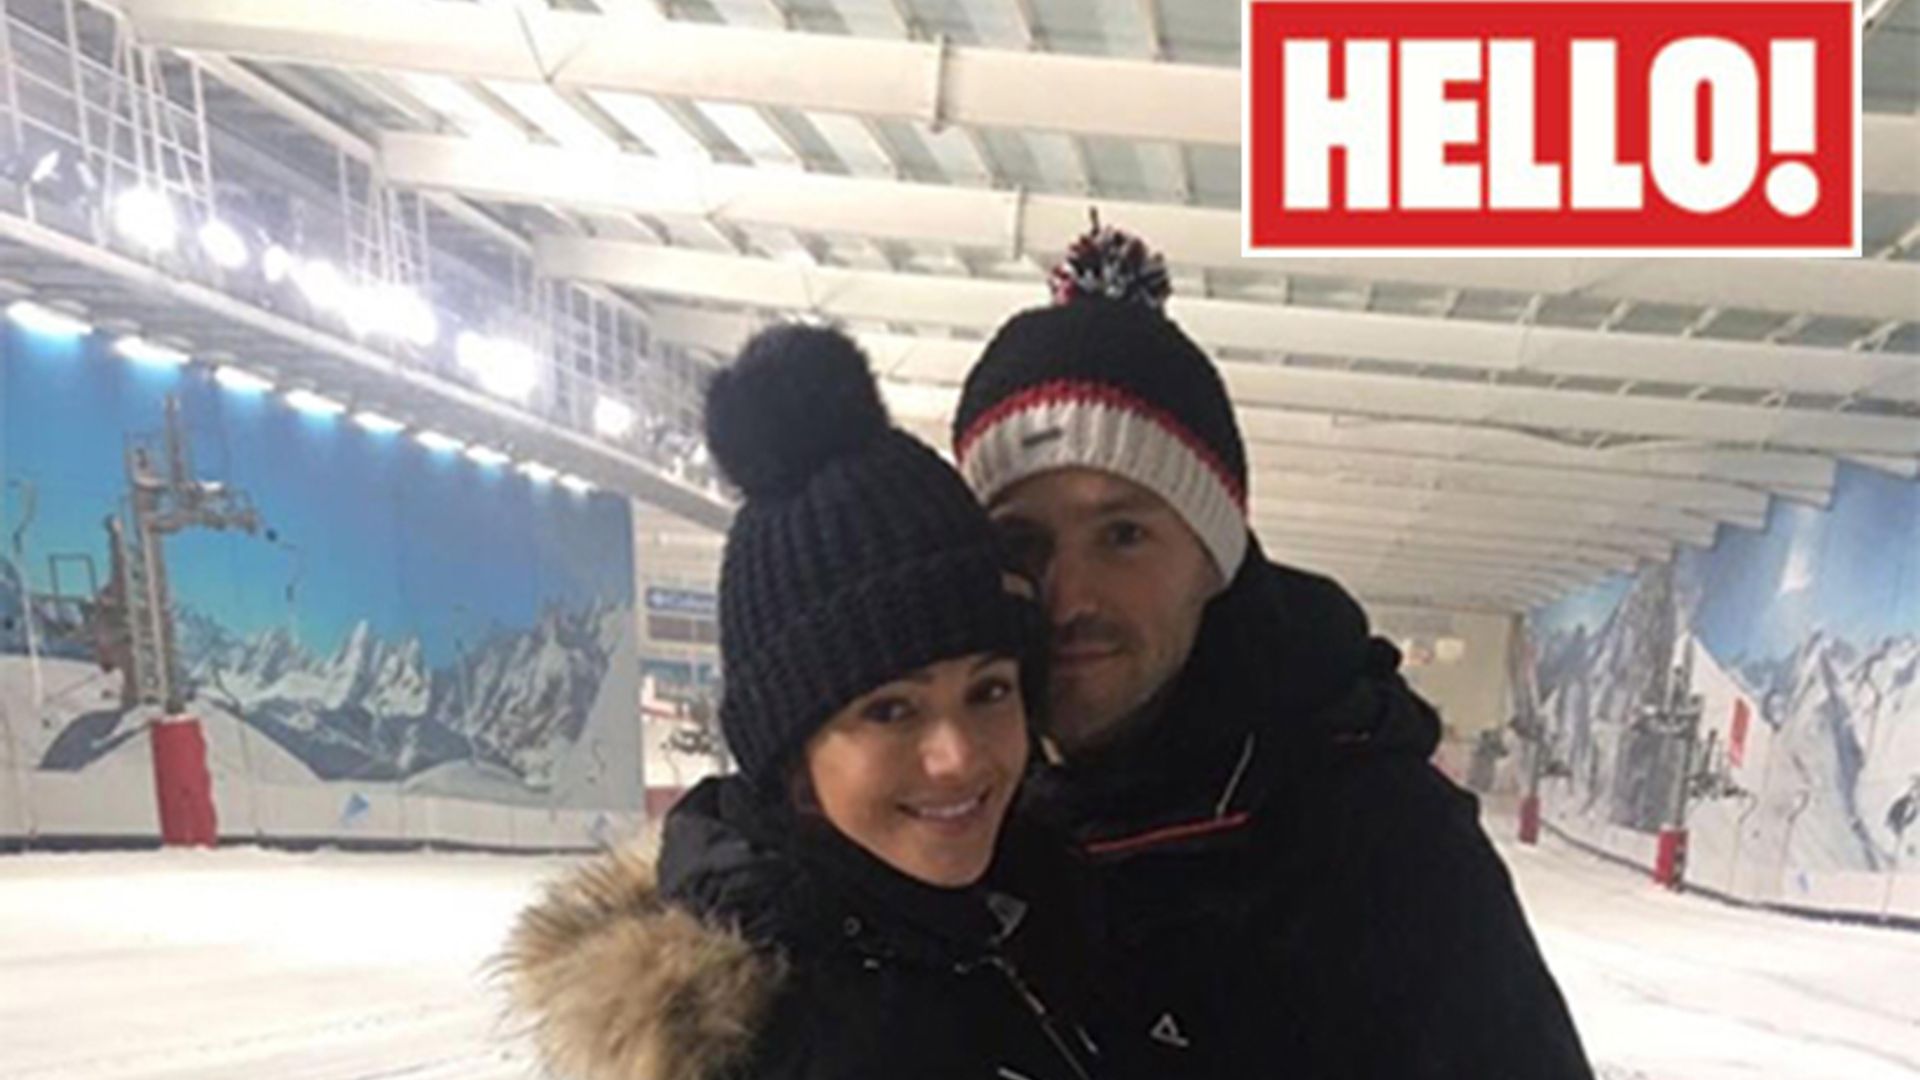 Michelle Keegan and Mark Wright are learning to ski – see the photos!